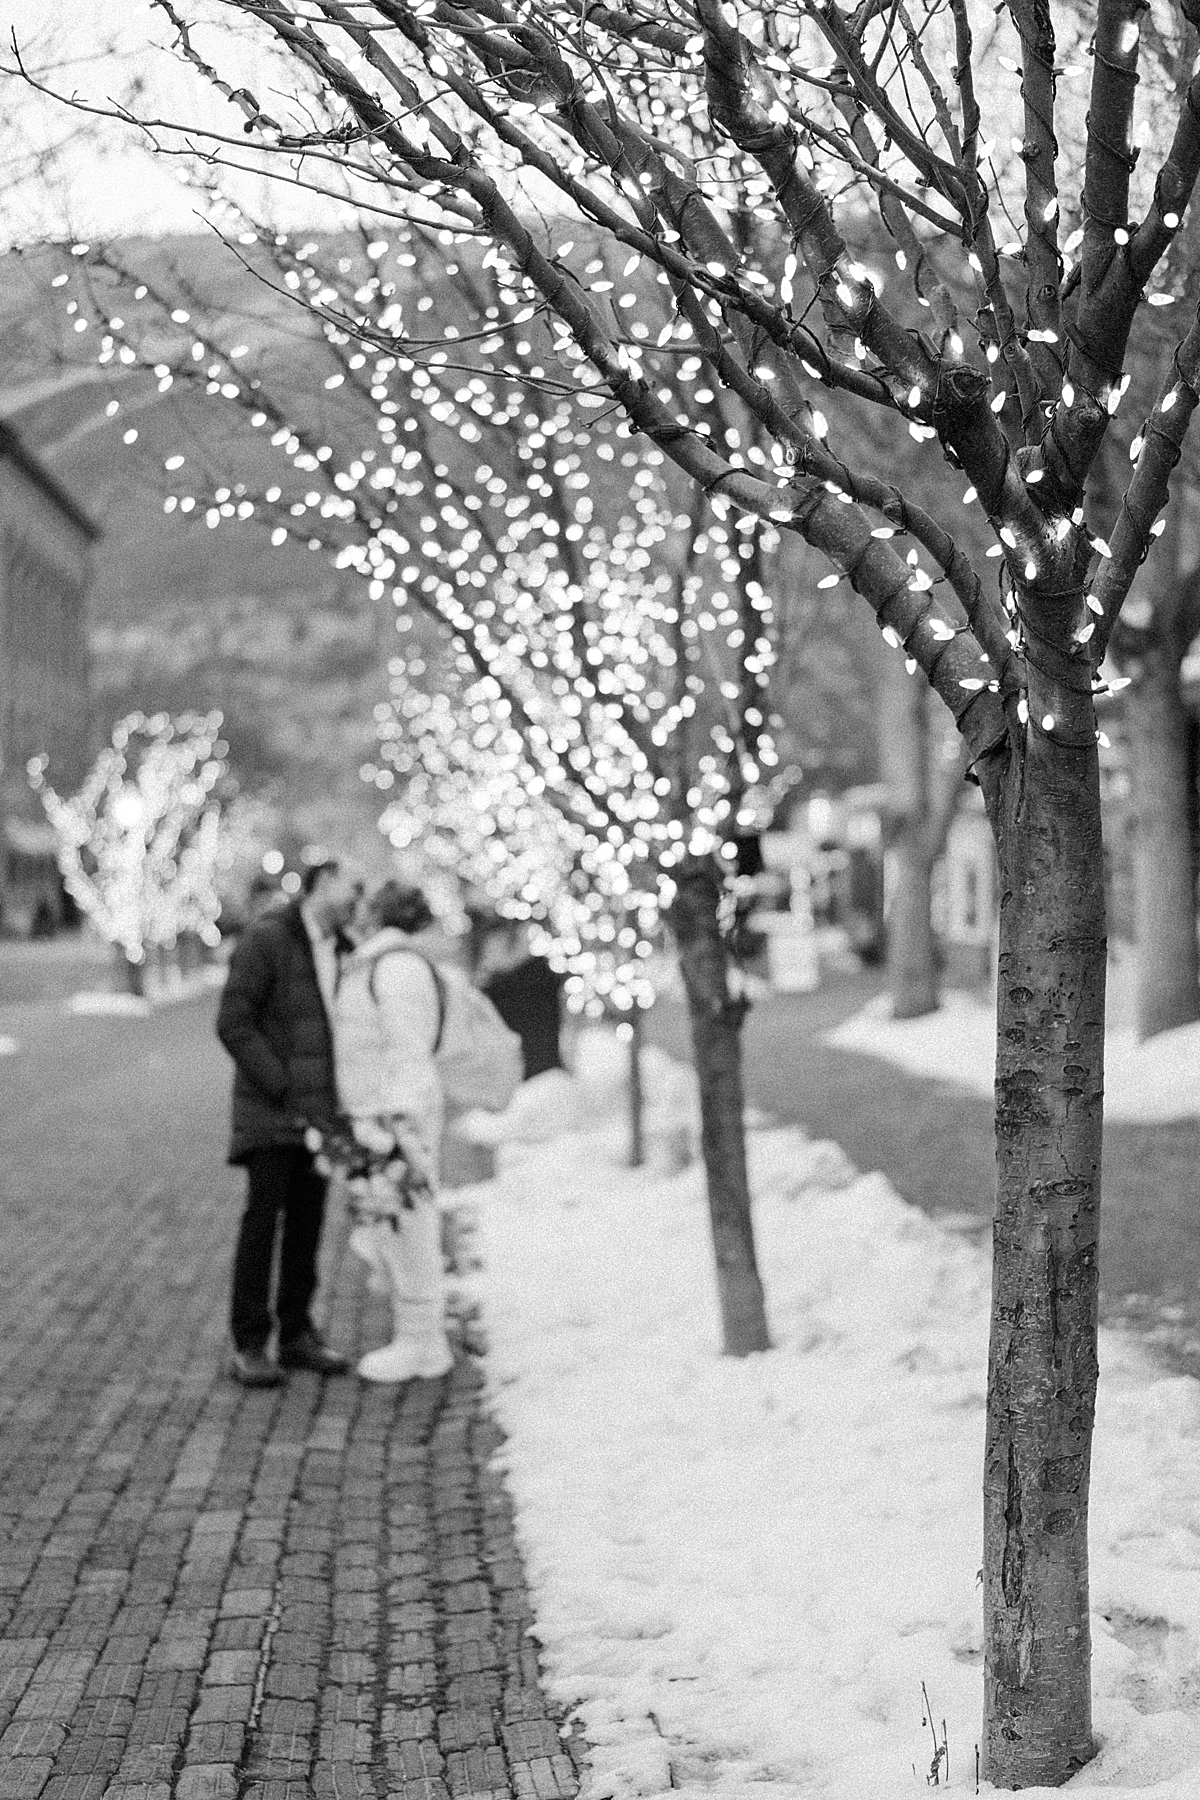 A bride and groom kiss under the sparkling lights in downtown Aspen in December.